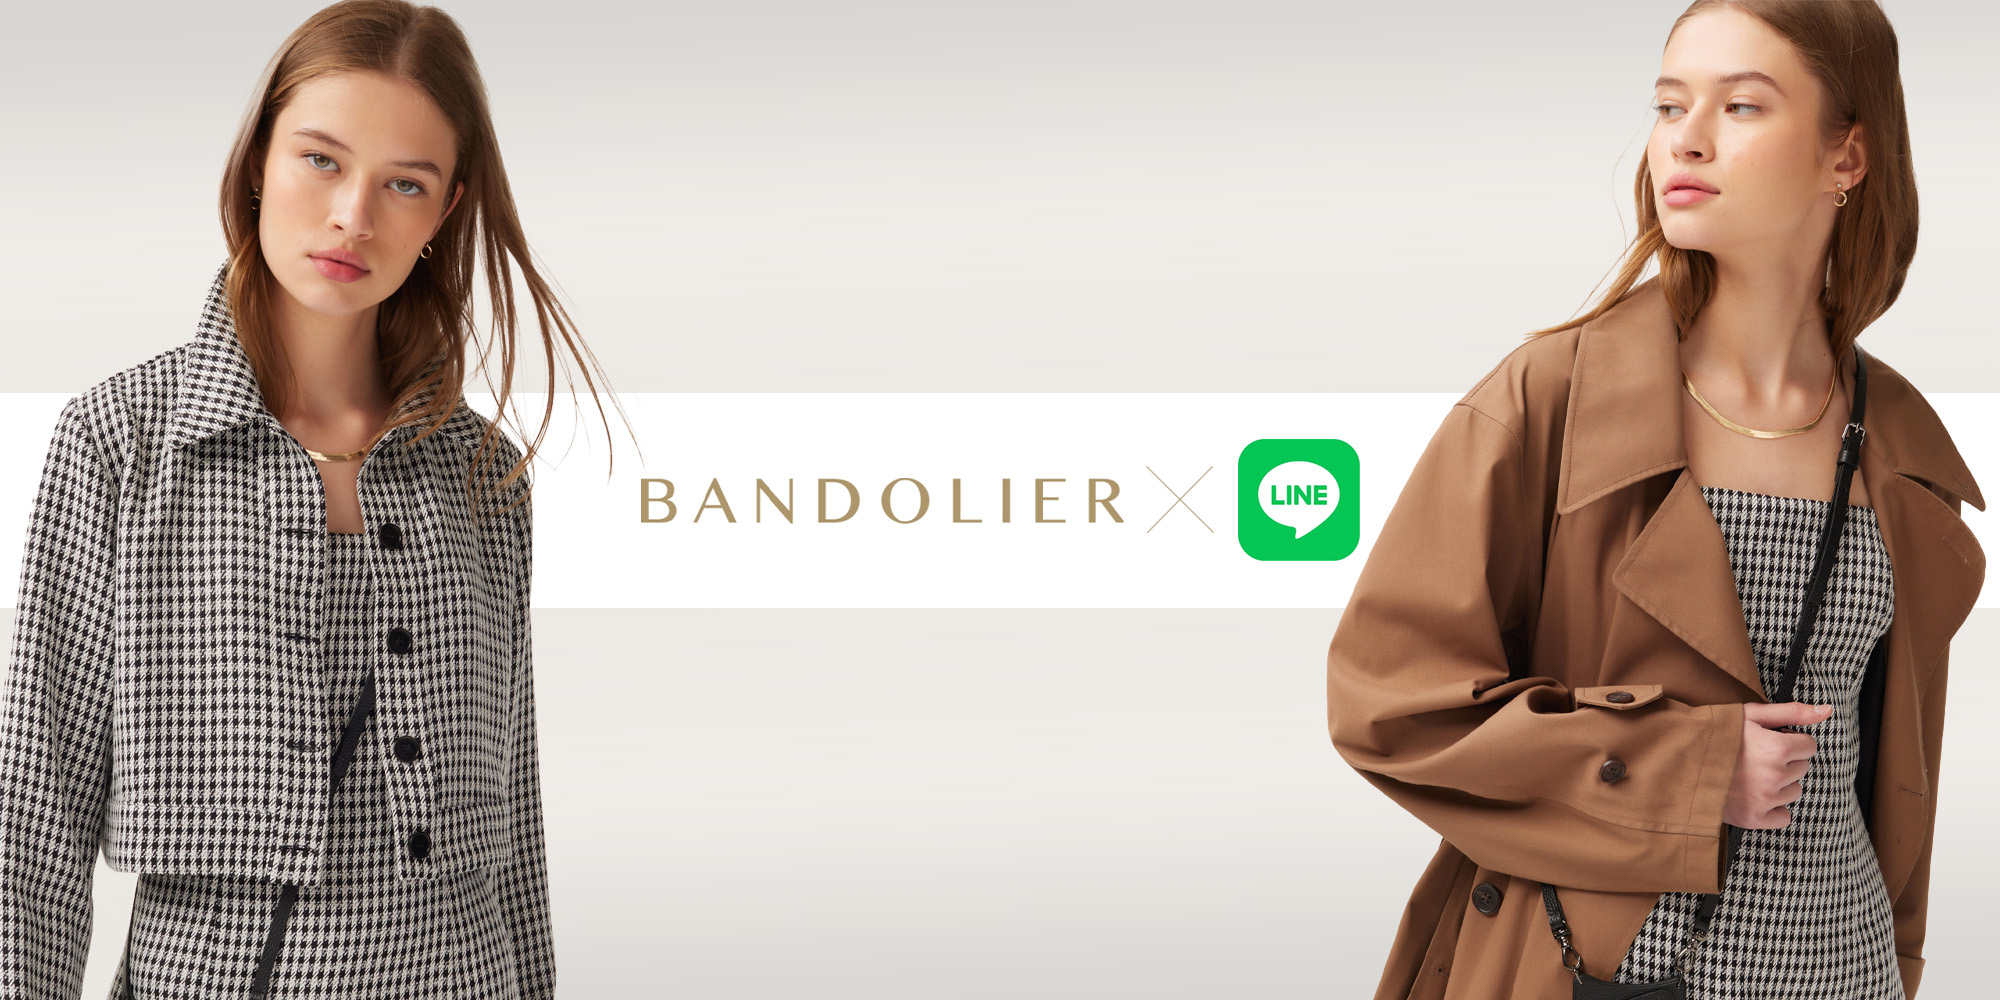 BANDOLIER LINE CONNECT PAGE